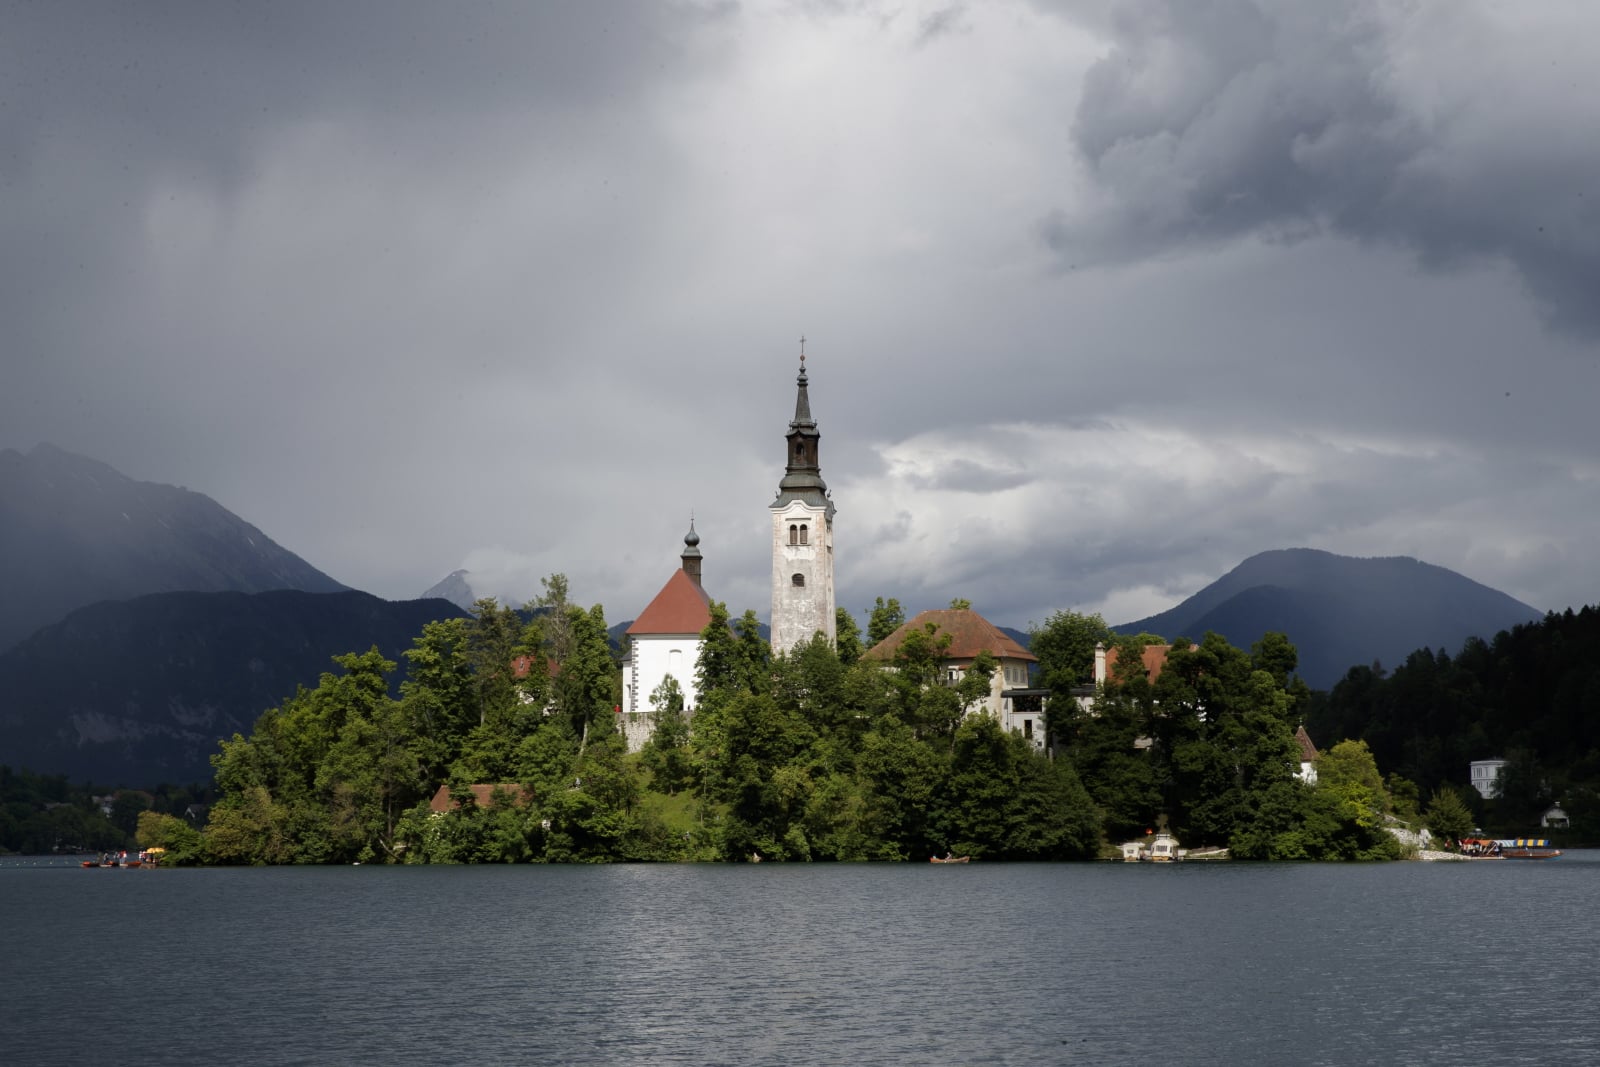 epa06744935 A view of the Church of the Assumption on Bled Island in Lake Bled, Slovenia, 17 May 2018. The pilgrimage church is dedicated to the Assumption of Mary.  EPA/VALDRIN XHEMAJ 
Dostawca: PAP/EPA.